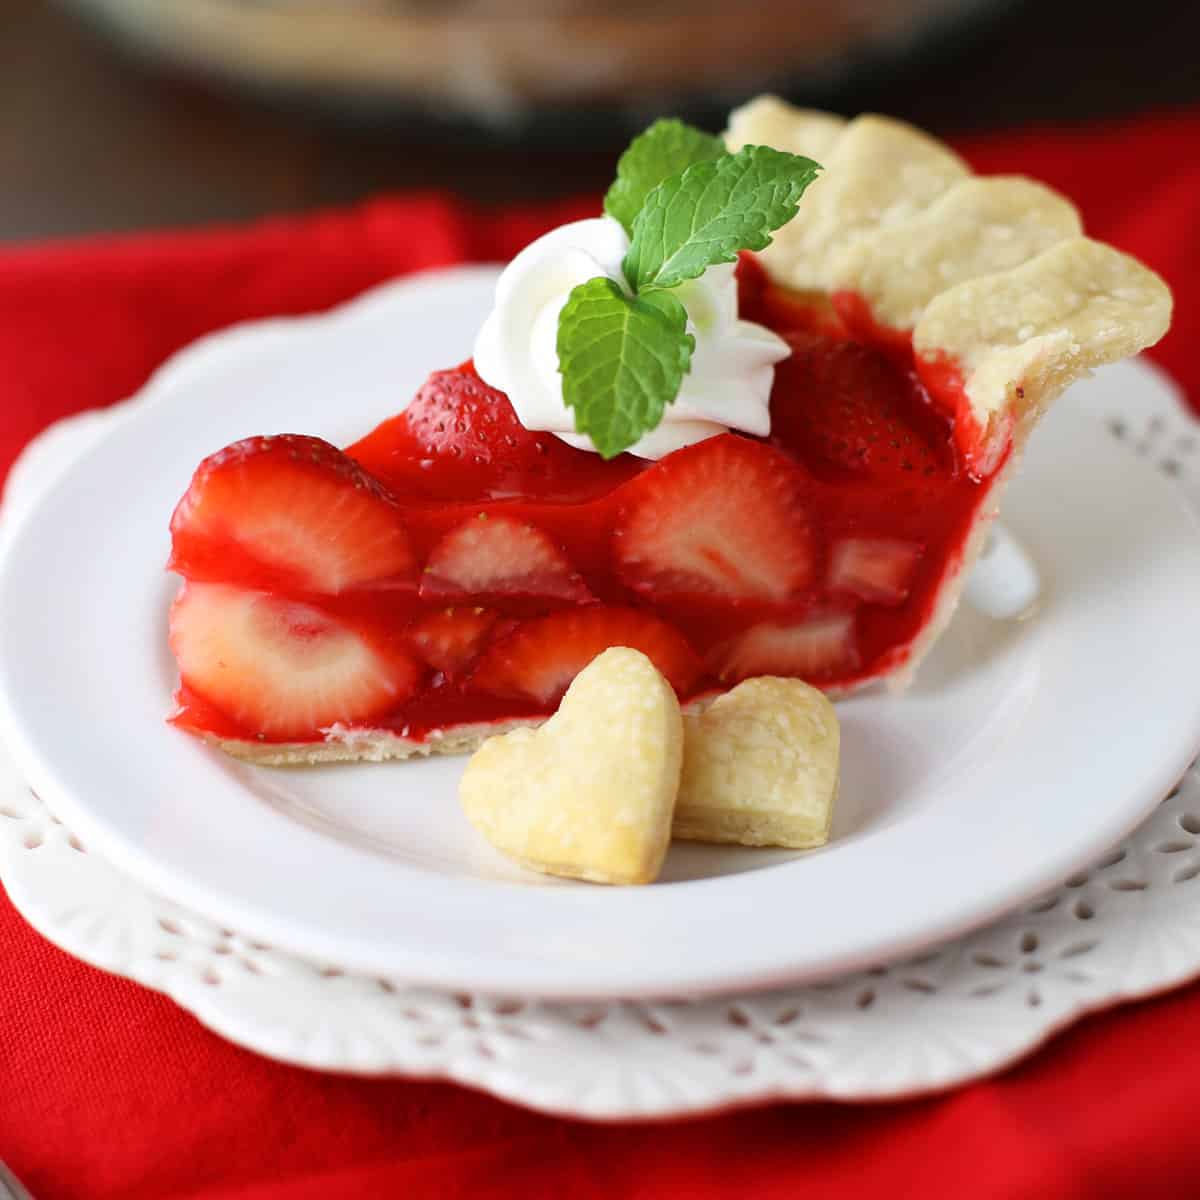 Strawberry pie on a white plate with mint leaf on top.